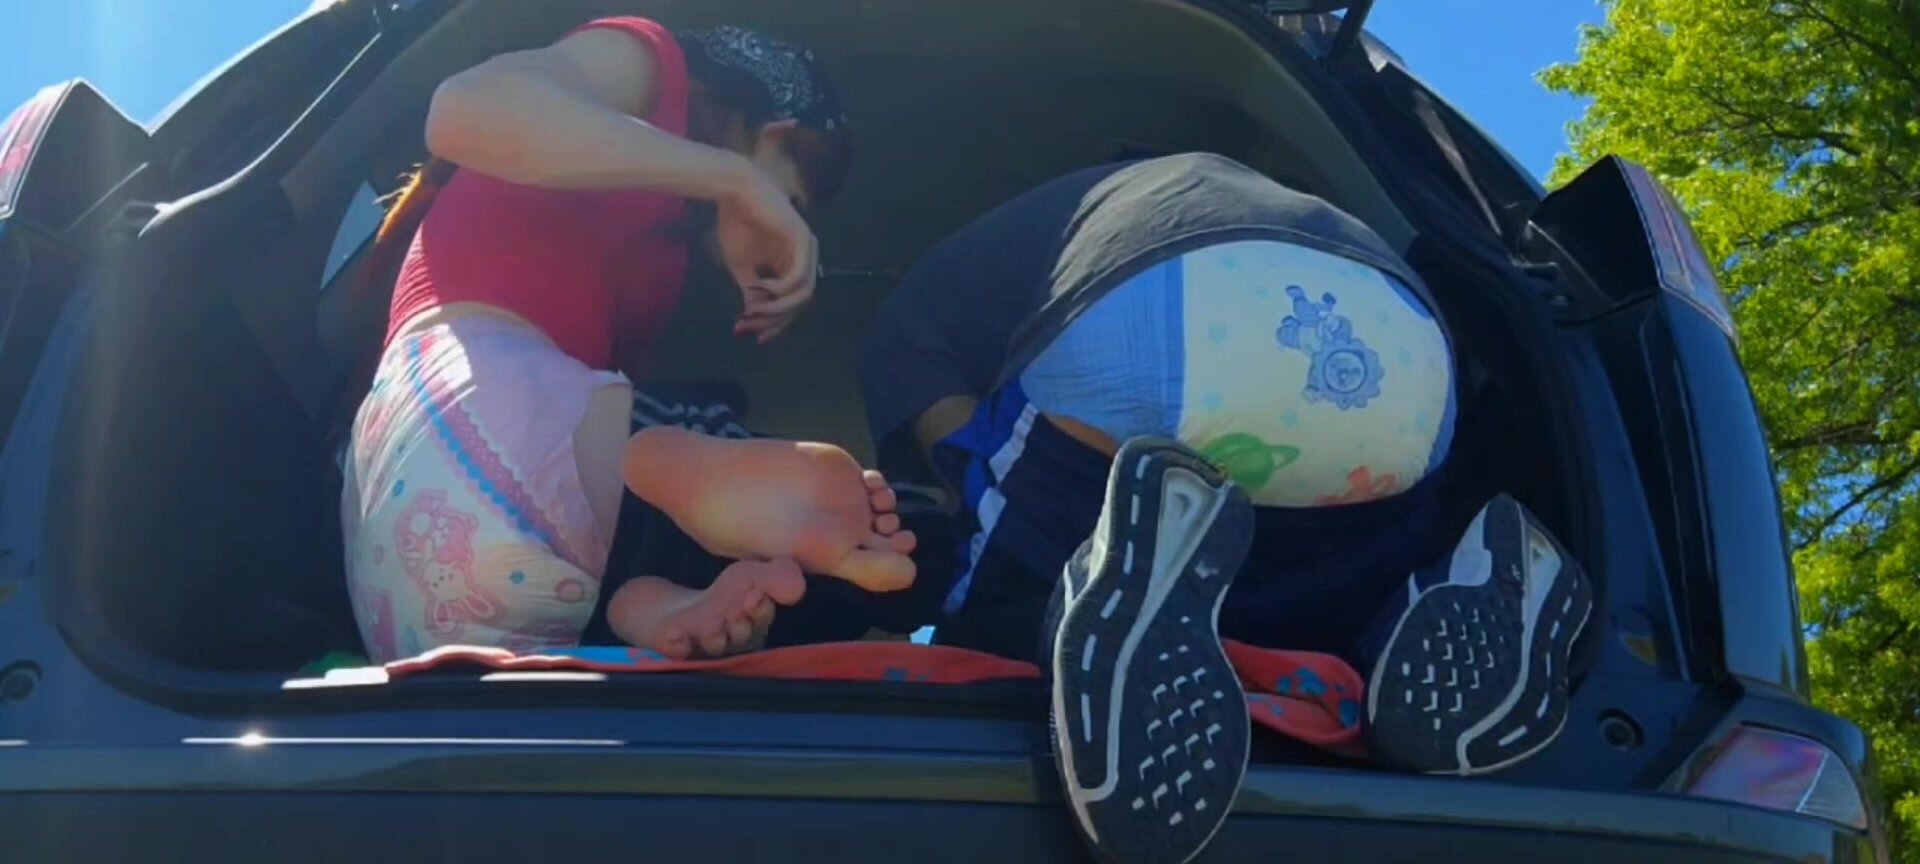 Diaper Girl & Boy Mess Their Diapers In Public